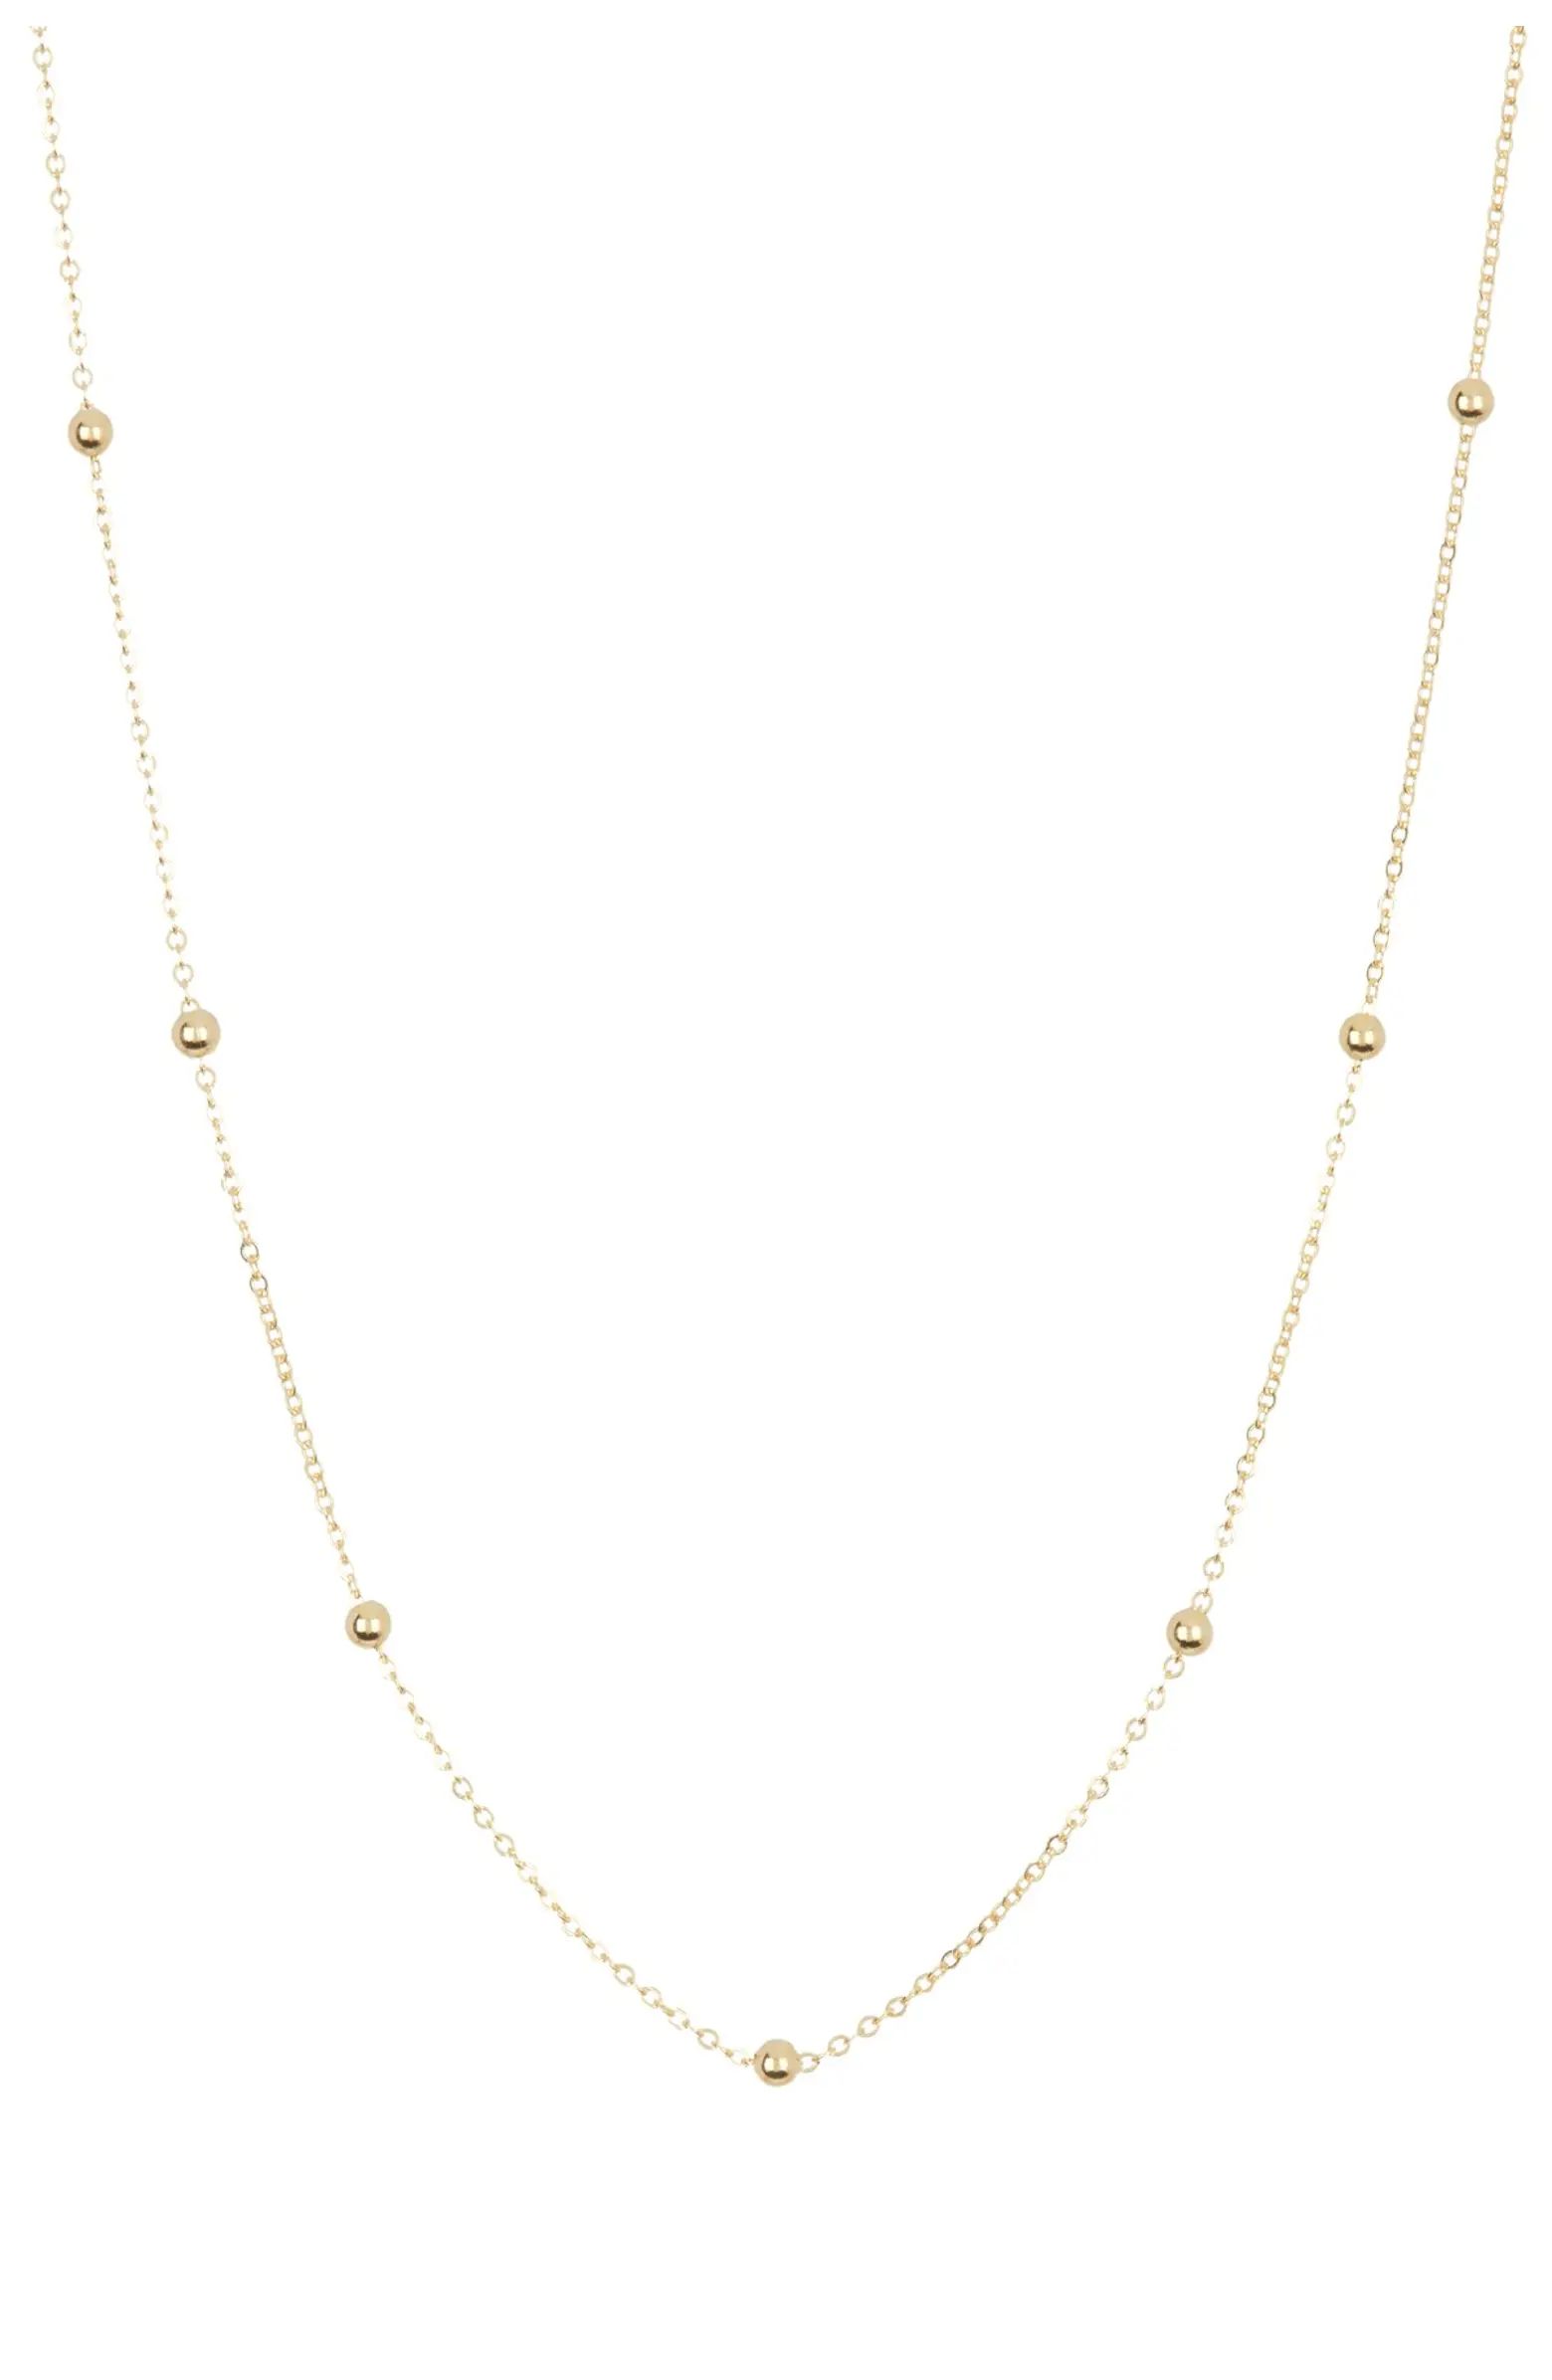 14K Yellow Gold 18" Diamond Cut Bead & Link Chain Necklace | Nordstrom Rack